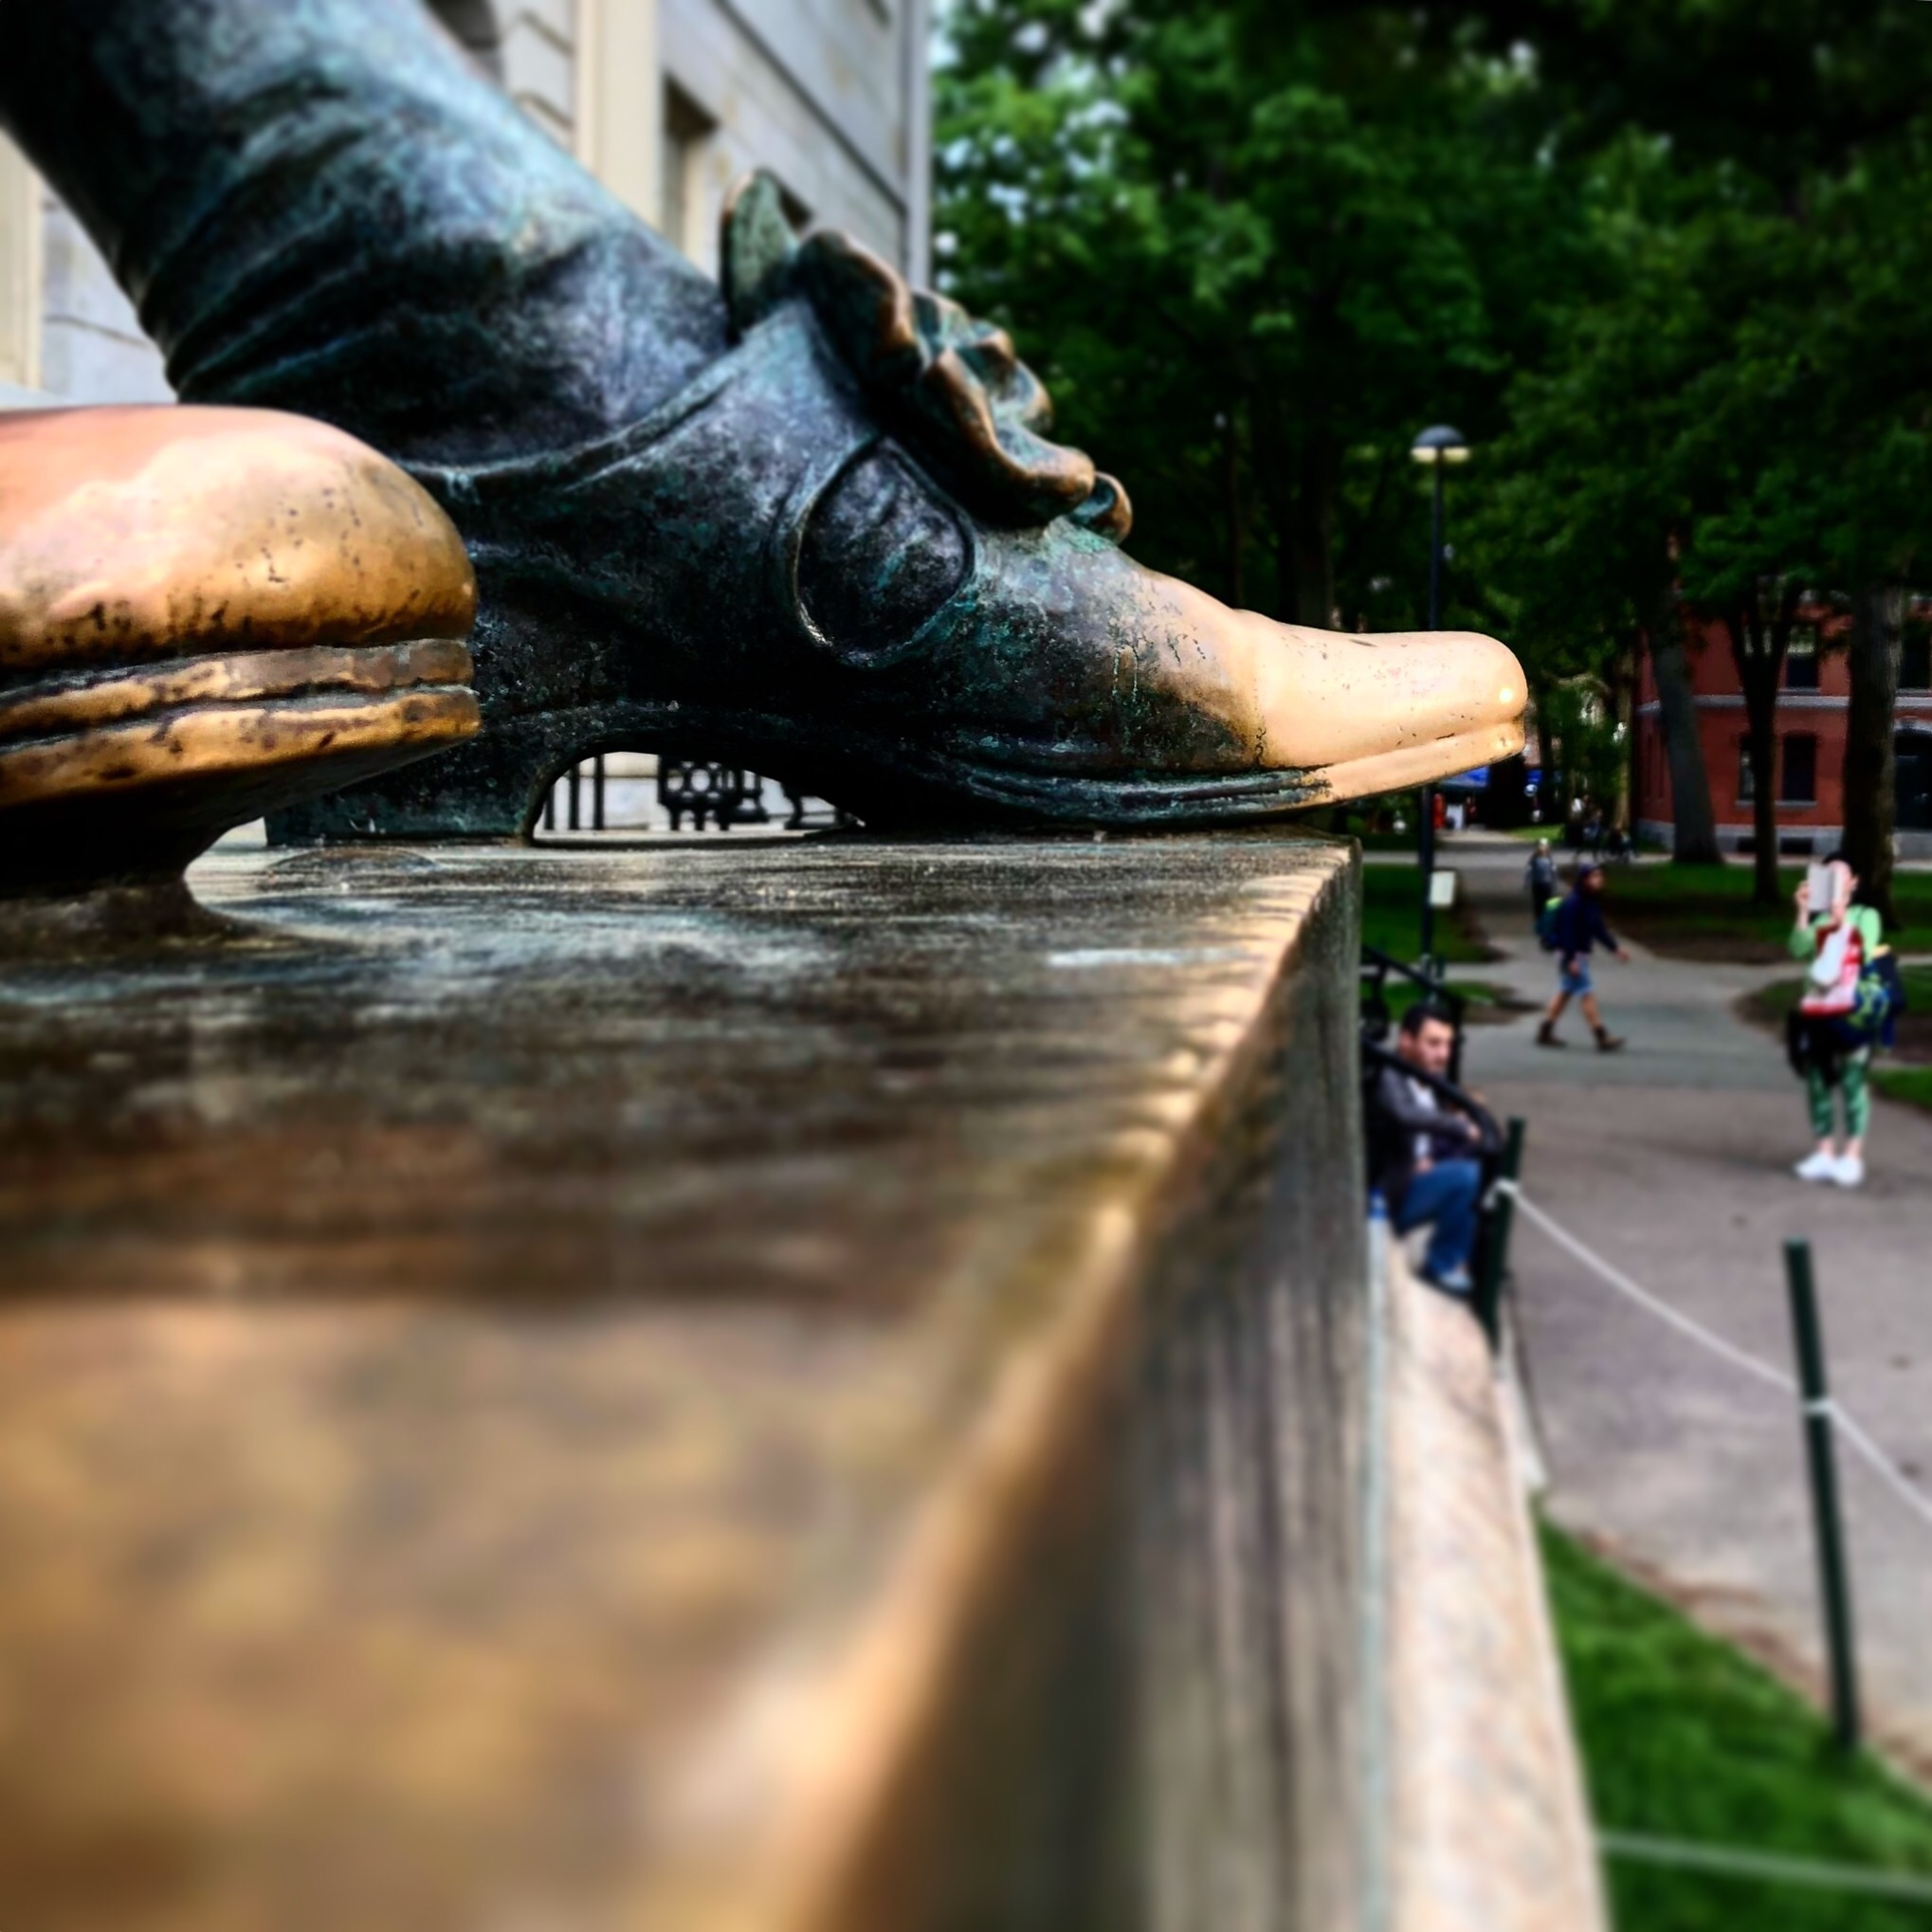 Rub the left foot for luck on John Harvard’s statue in Harvard Yard in Cambridge, MA. You won’t be alone- the bronze shoe is shined bright by all those who pass by for a touch. 

#boston #cambridge #cambridgema #travelblog 